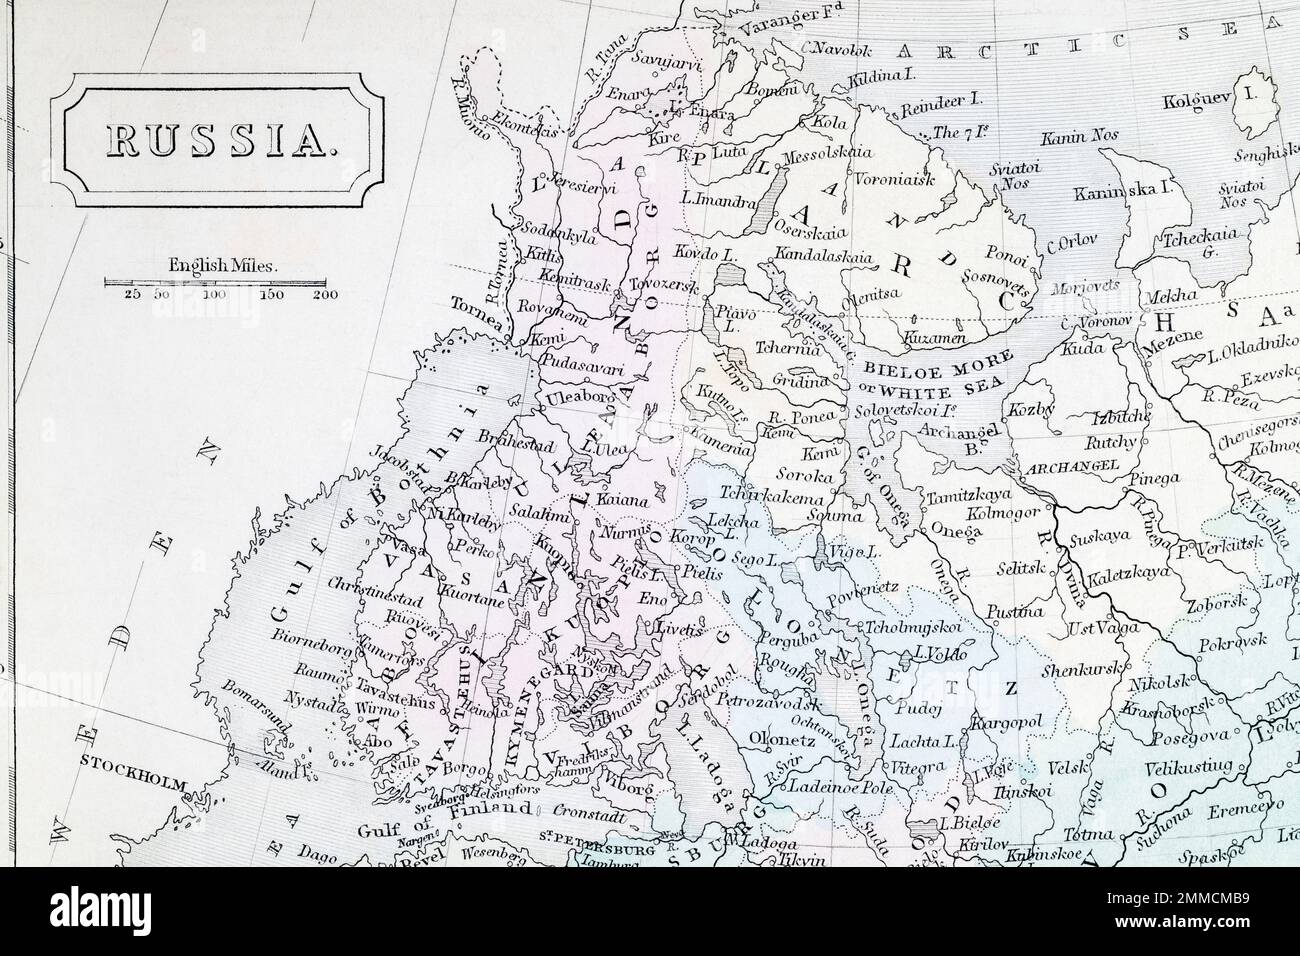 c. 1850 / 60 Atlas map of Finland and surrounding Baltic states. For Finland territory changes, Finland borders, Russia-Finland relations & hostility. Stock Photo